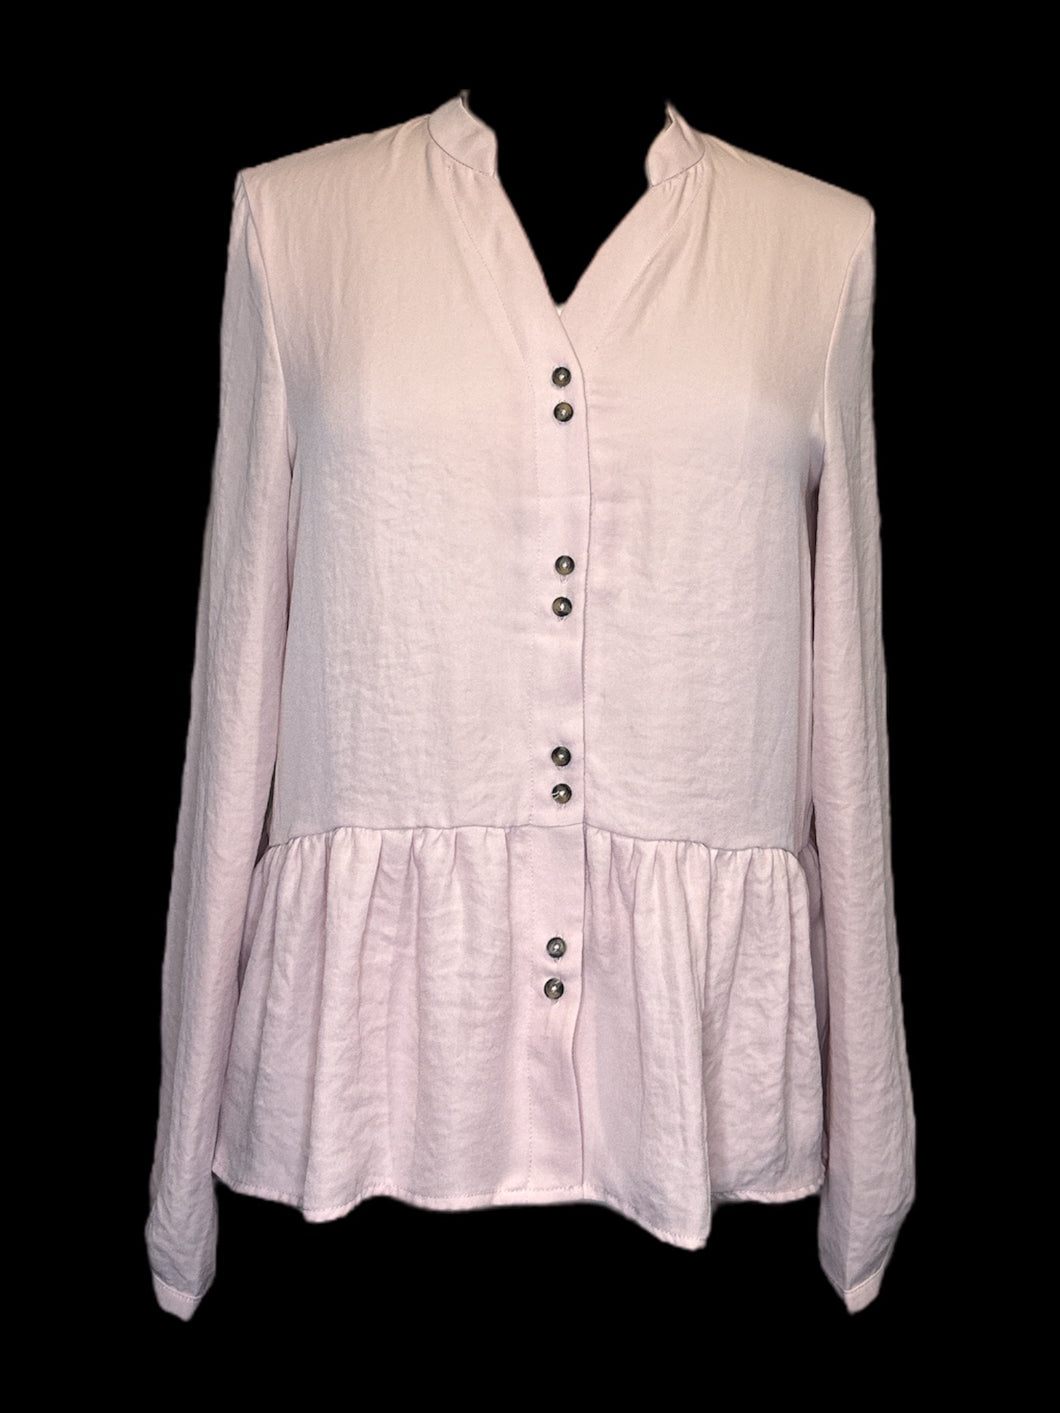 M Light pink long sleeve V neck top w/ band collar, button balloon sleeves, two button pattern closure, & ruffled hem